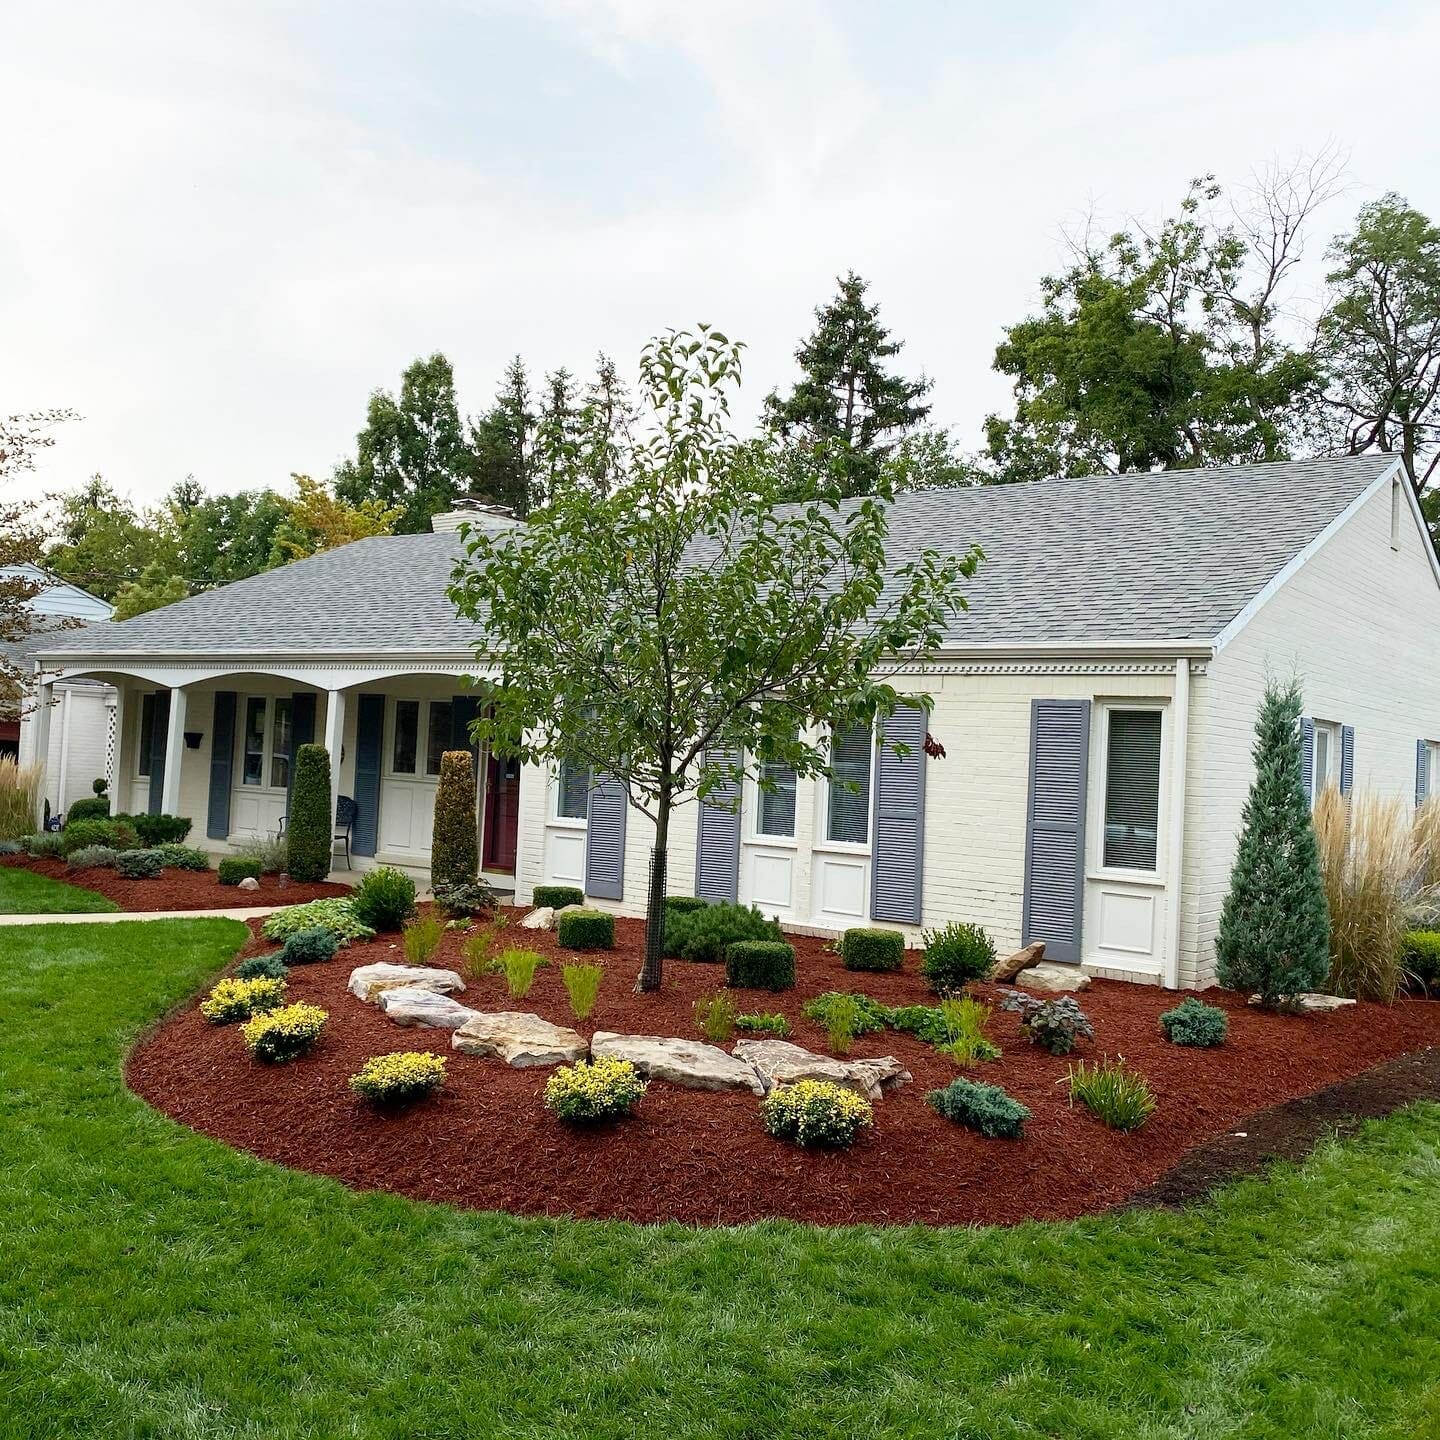 Landscaping Services in Upper St. Clair, PA